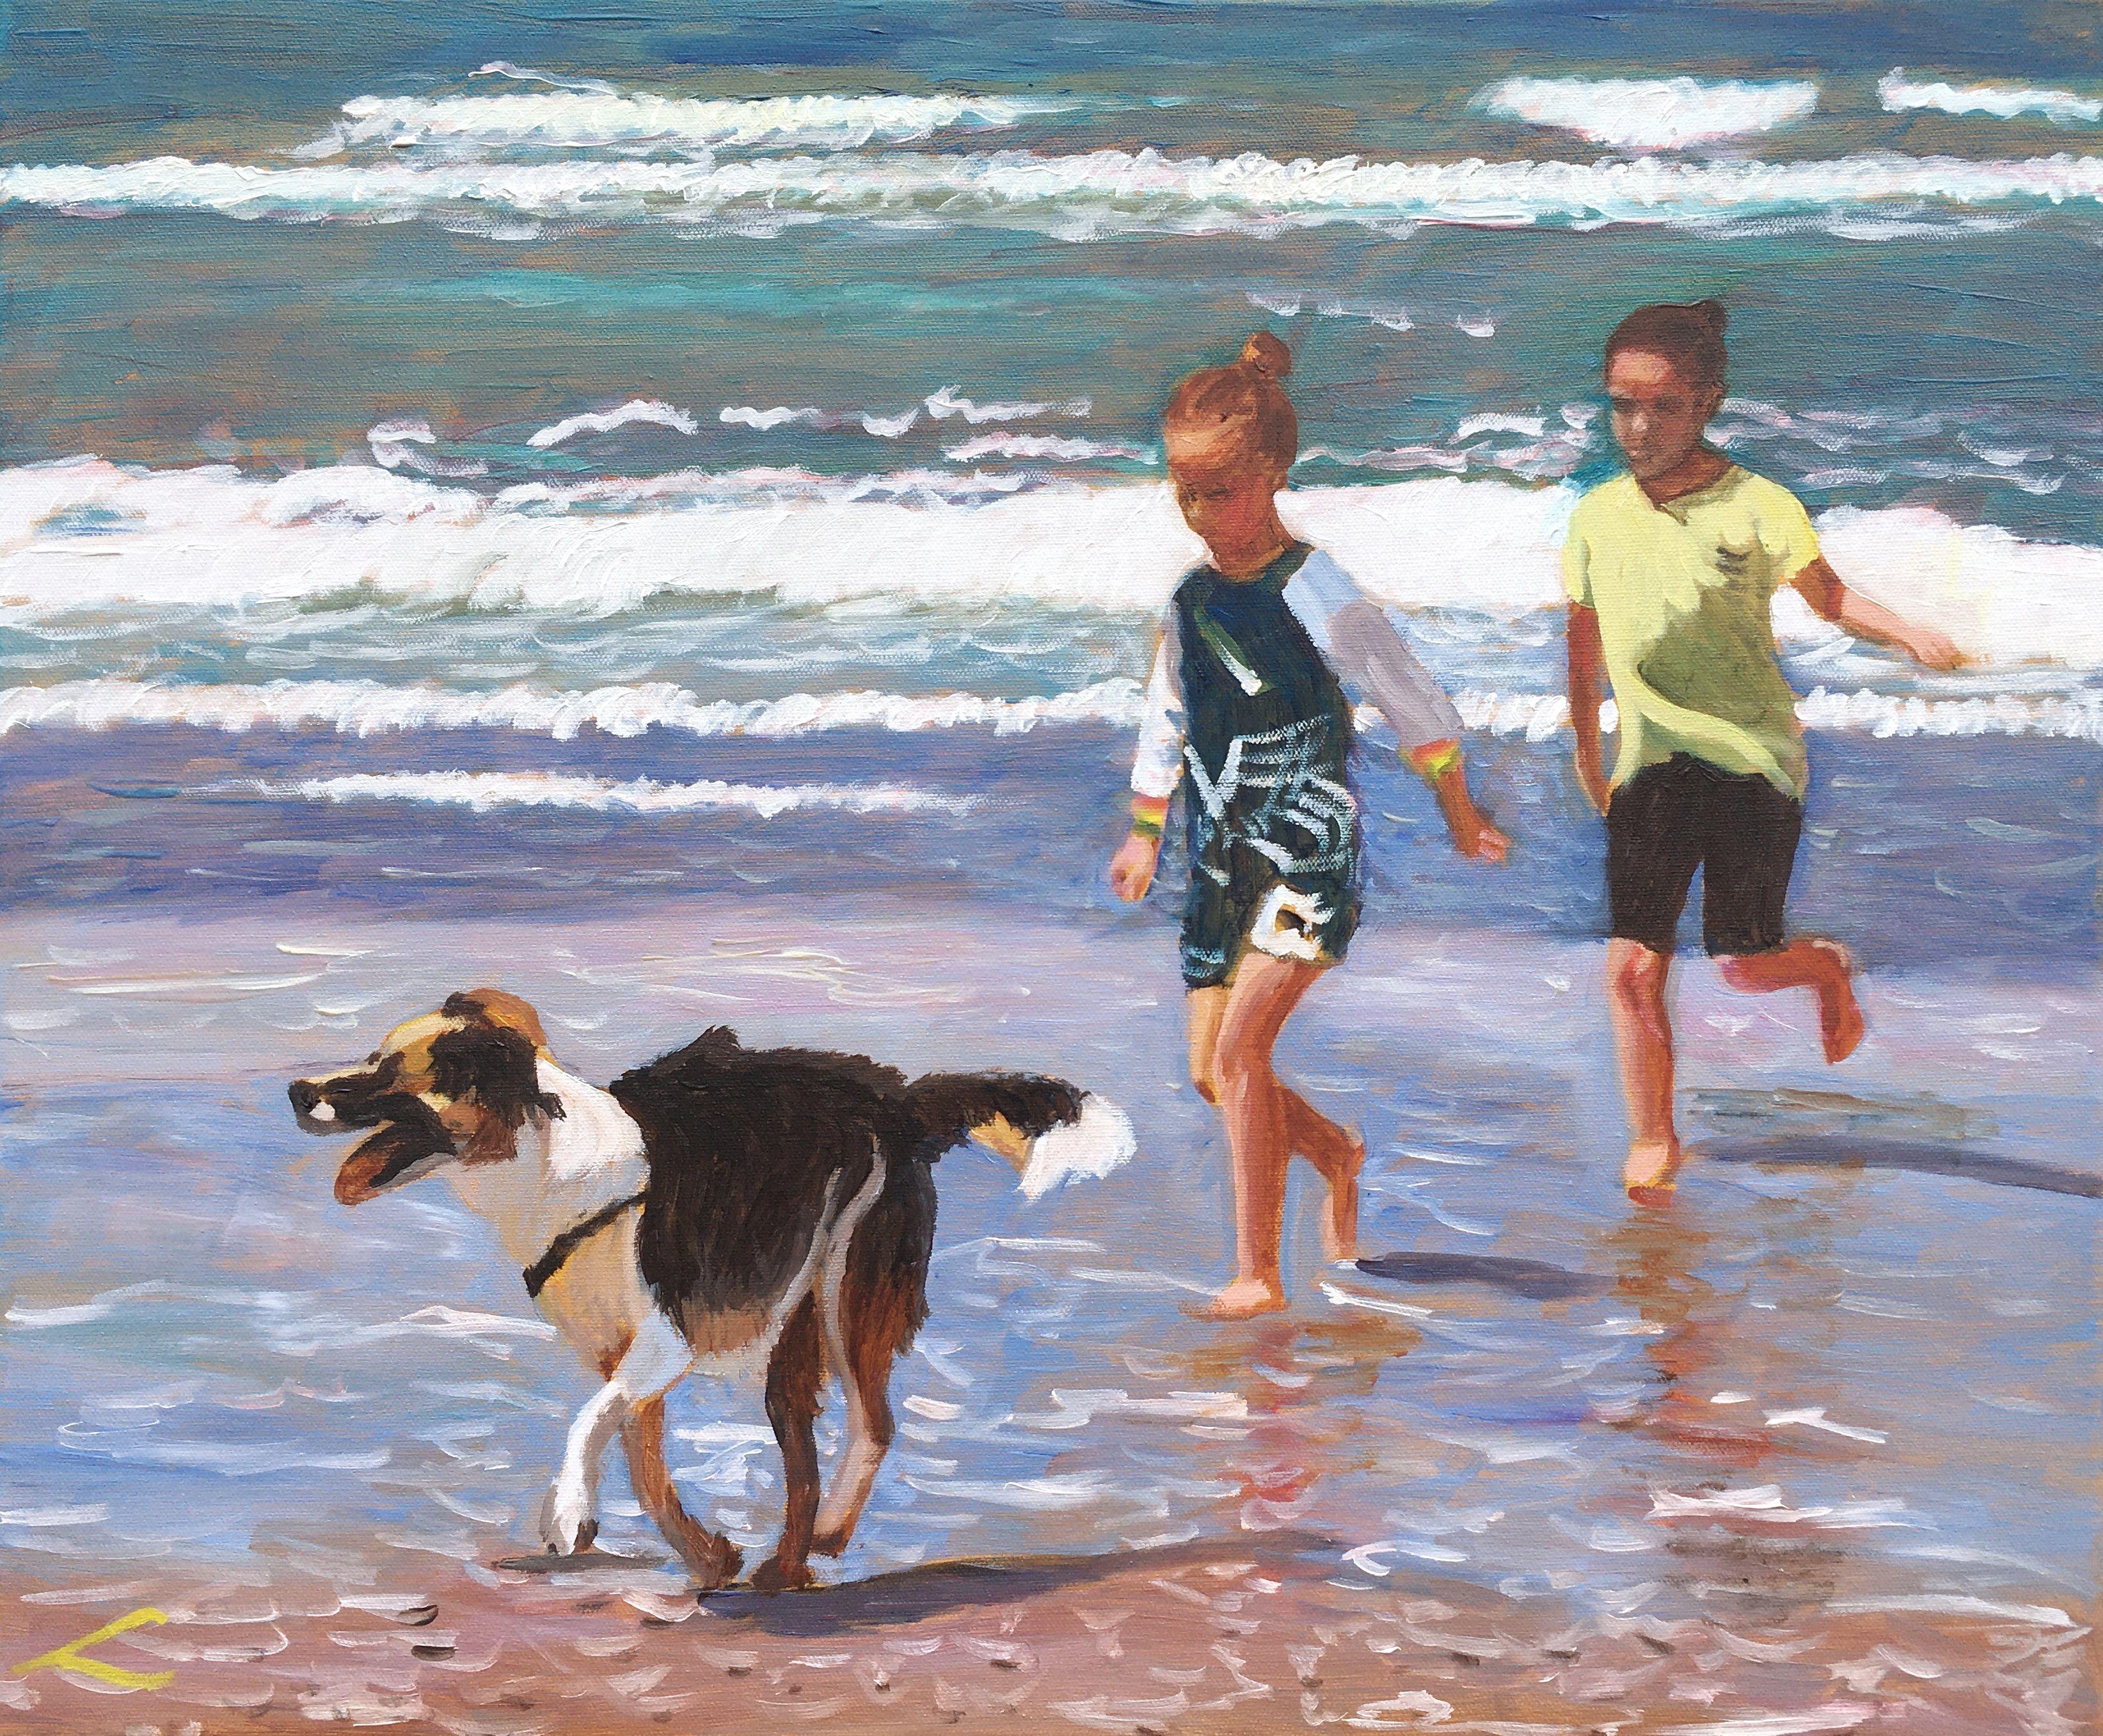 Alla prima oil painting with few final touches when dry. Beautiful weather with a big shining sun. And Iâ€™m standing there taking it all in. The many spectacular sights jump at my eyes. Kids and dogs run around and splash each other I see happy